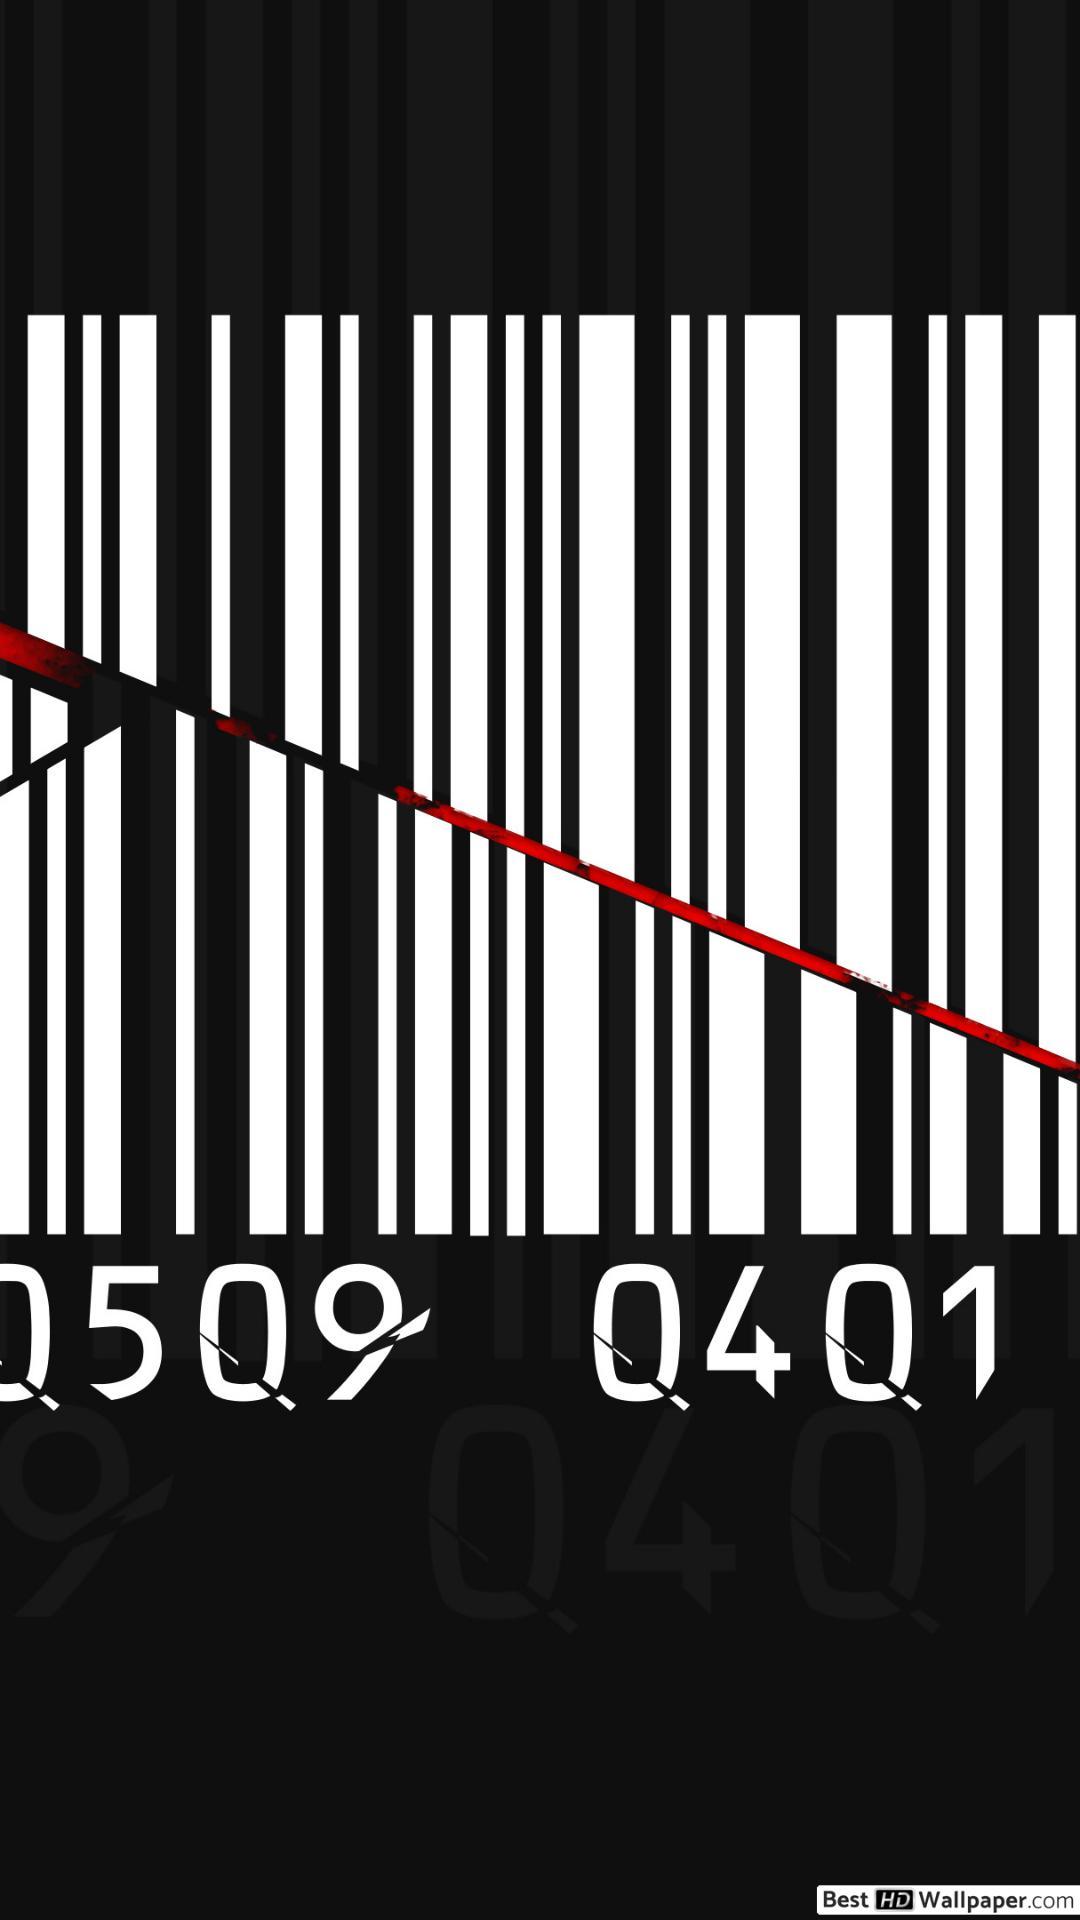 Anonymous Barcode Ultra HD Desktop Background Wallpaper for 4K UHD TV   Tablet  Smartphone